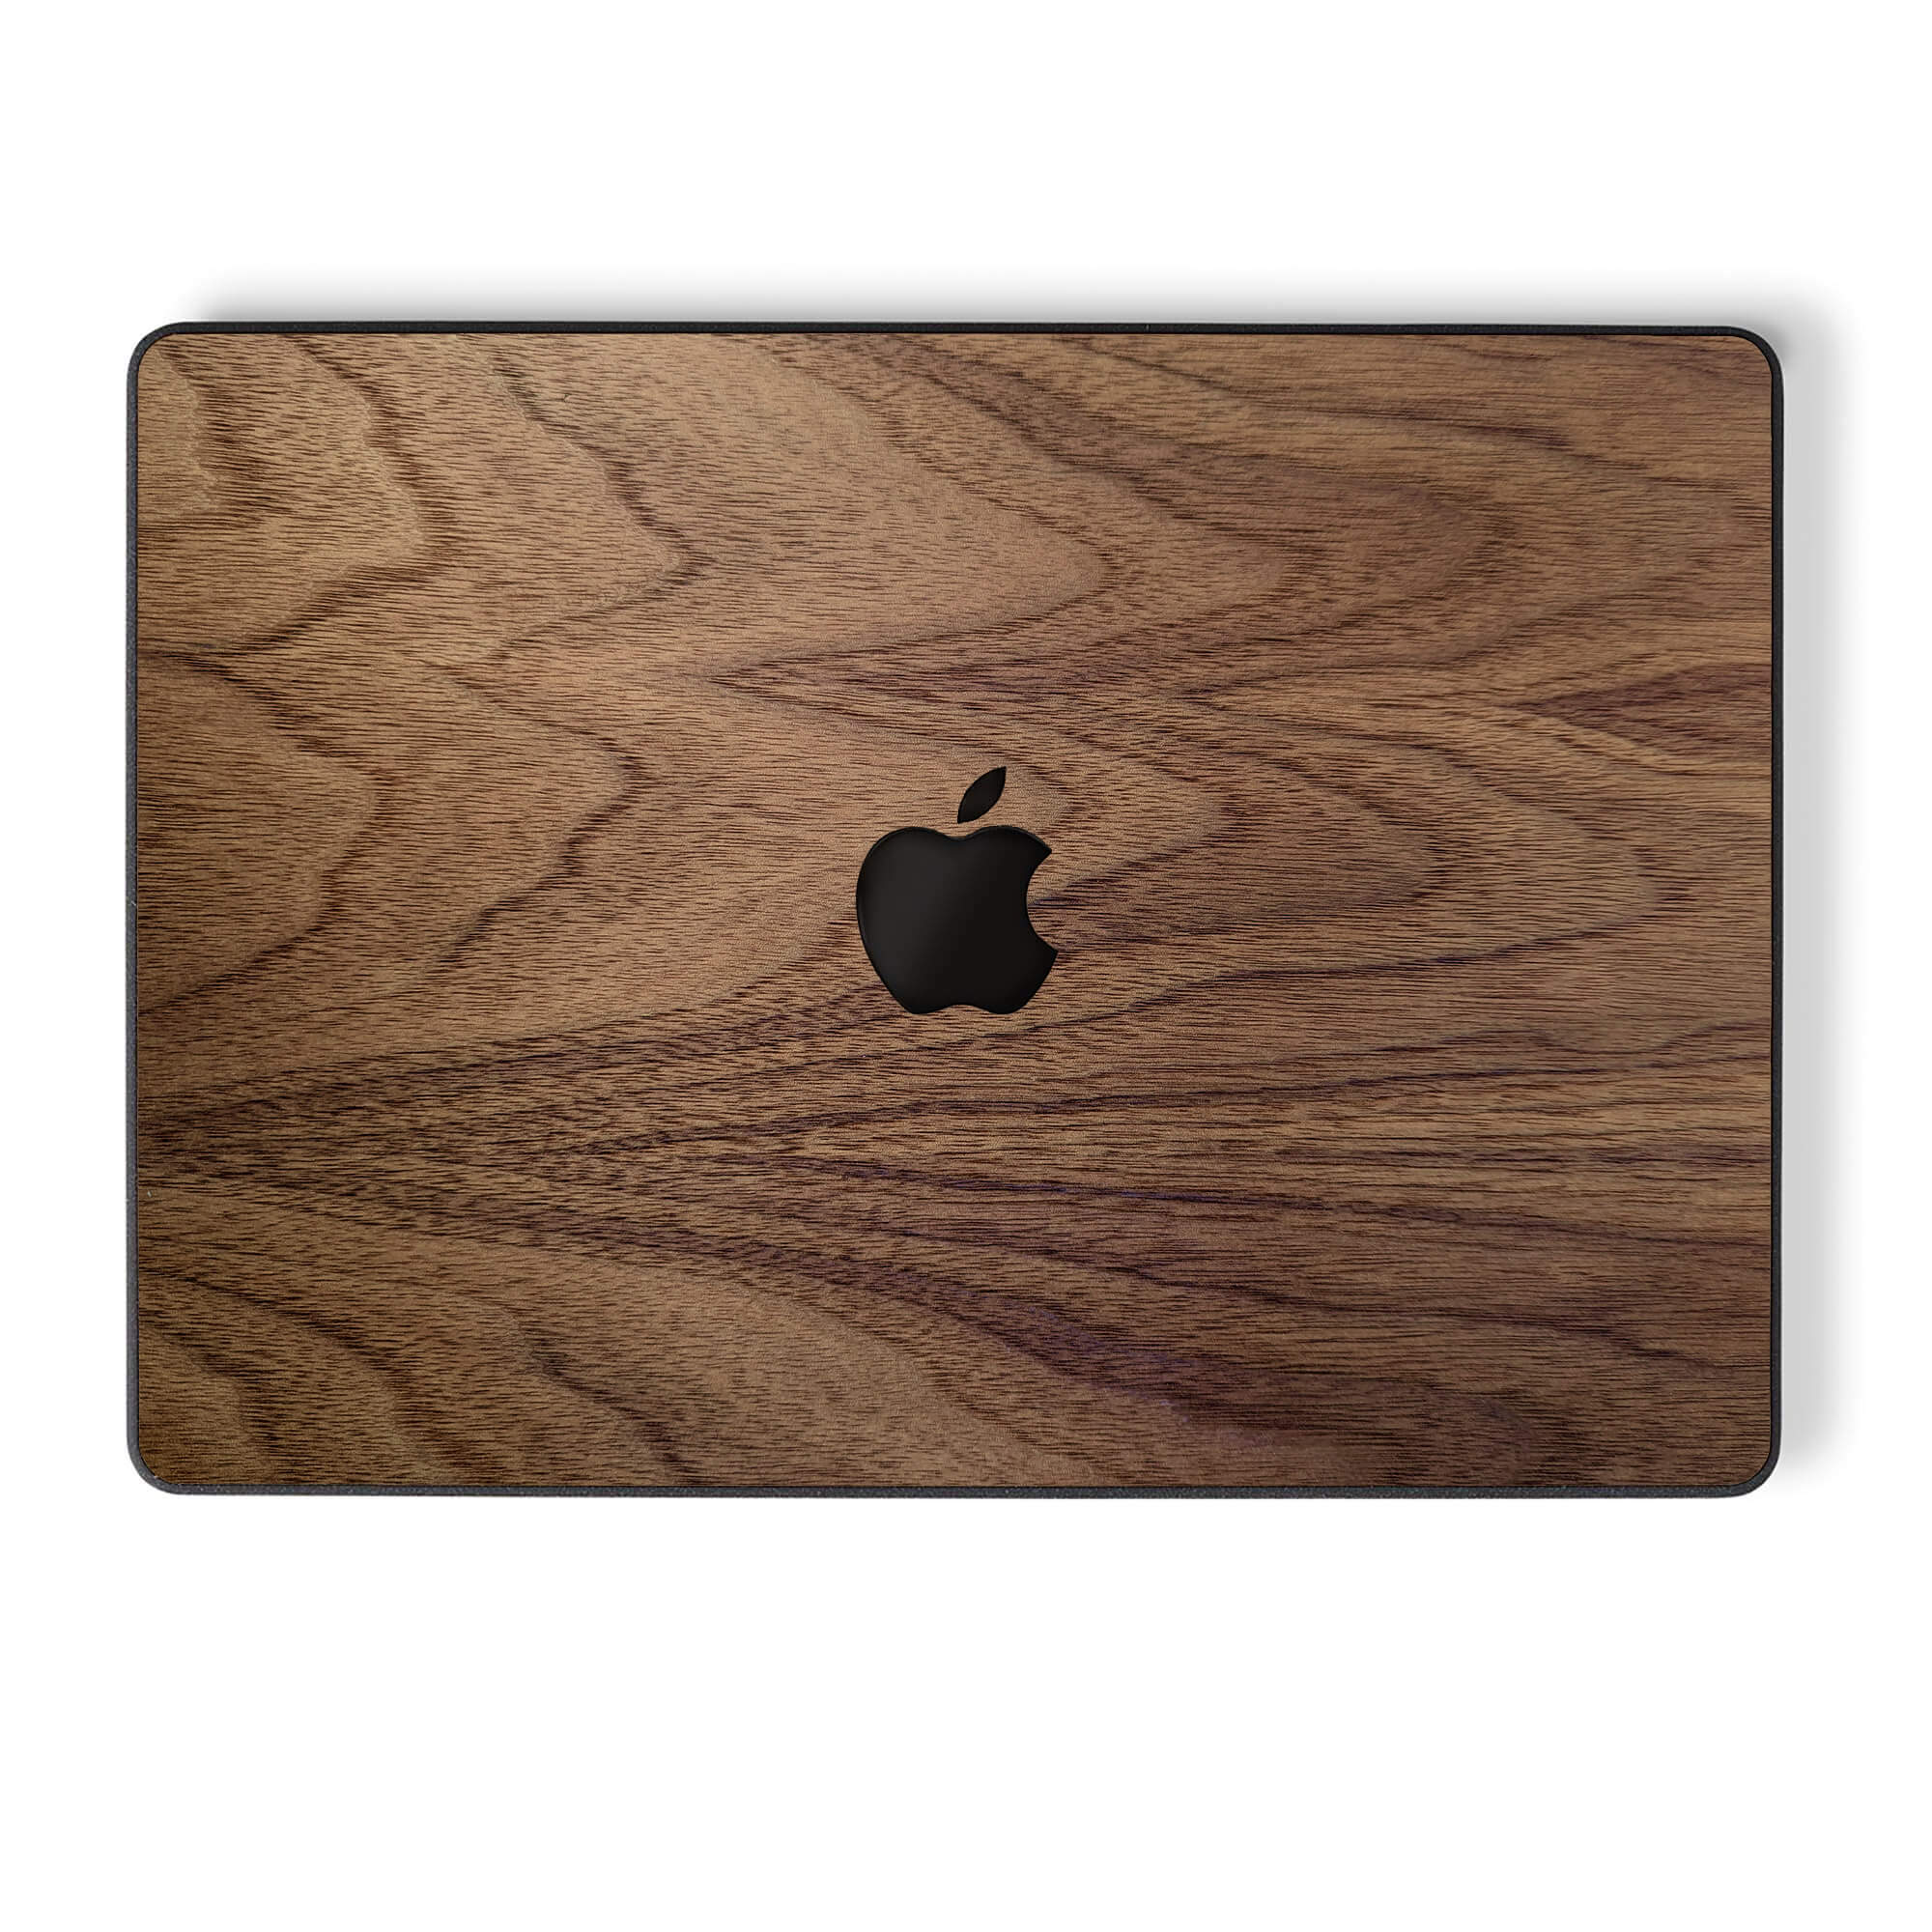 Hard Plastic - Cases & Protection - Mac Accessories - Apple